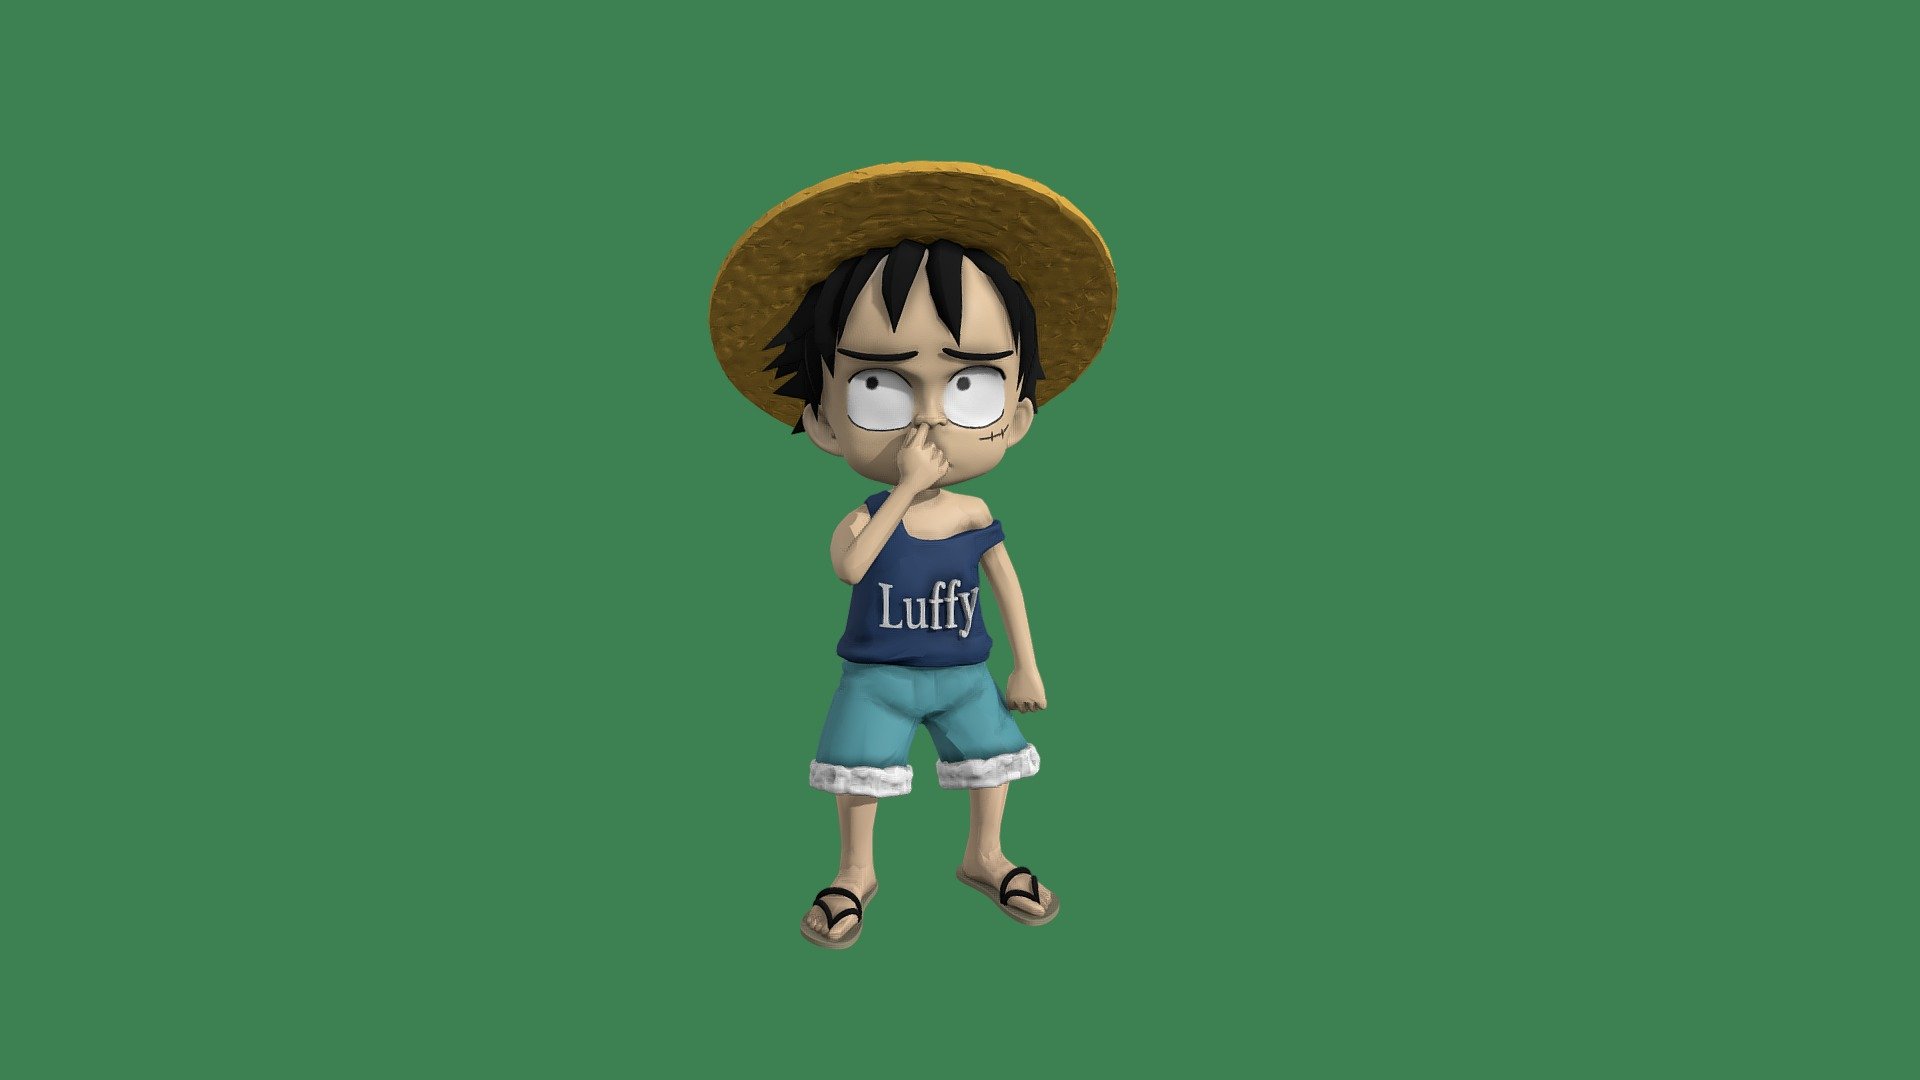 THIS IS A SUPER DECIMATED VERSION FOR SKETCHFAB
Hd image here: https://www.artstation.com/marketplace/p/2dyd9/luffy-one-piece?utm_source=artstation&amp;utm_medium=referral&amp;utm_campaign=homepage&amp;utm_term=marketplace

Kid Luffy from One piece fan art. Sliced, you can choose 3 different options to print it! (also as a keychain)

Send me pic of your print on instagram! -&gt; https://www.instagram.com/___domp/

If you have any problem write me: domenicopil@libero.it

FOR PERSONAL USE ONLY. NOT FOR COMMERCIAL PRINTING ! - Luffy One Piece - 3D model by Dom Phill (@DomPhill) 3d model